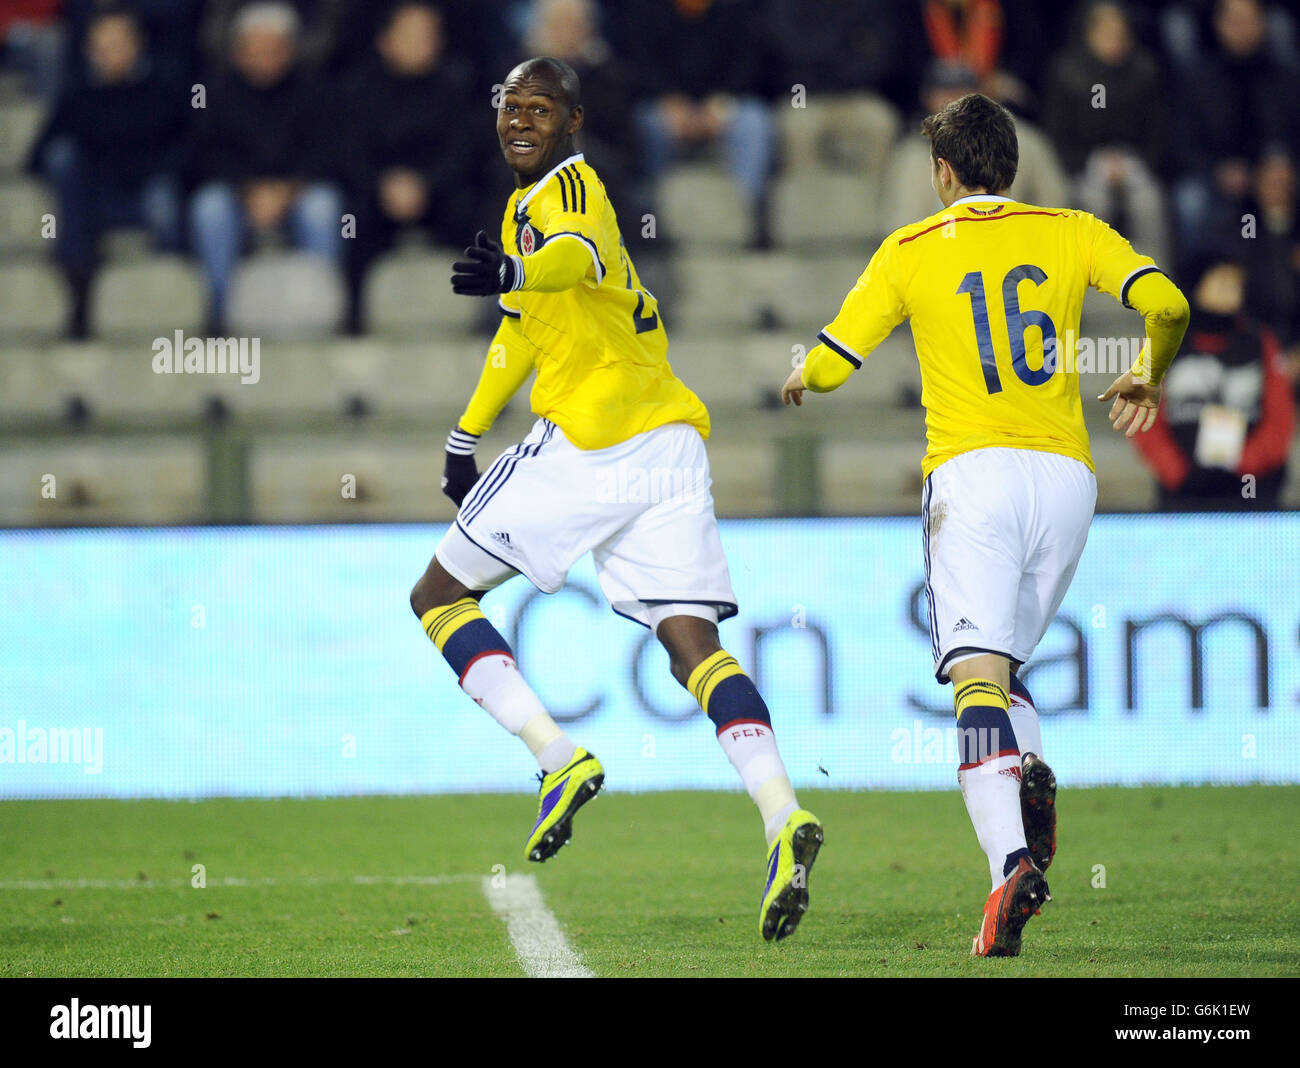 Soccer - International Friendly - Belgium v Colombia - King Baudouin Stadium. Colombia's Victor Ibarbo celebrates scoring the second goal Stock Photo